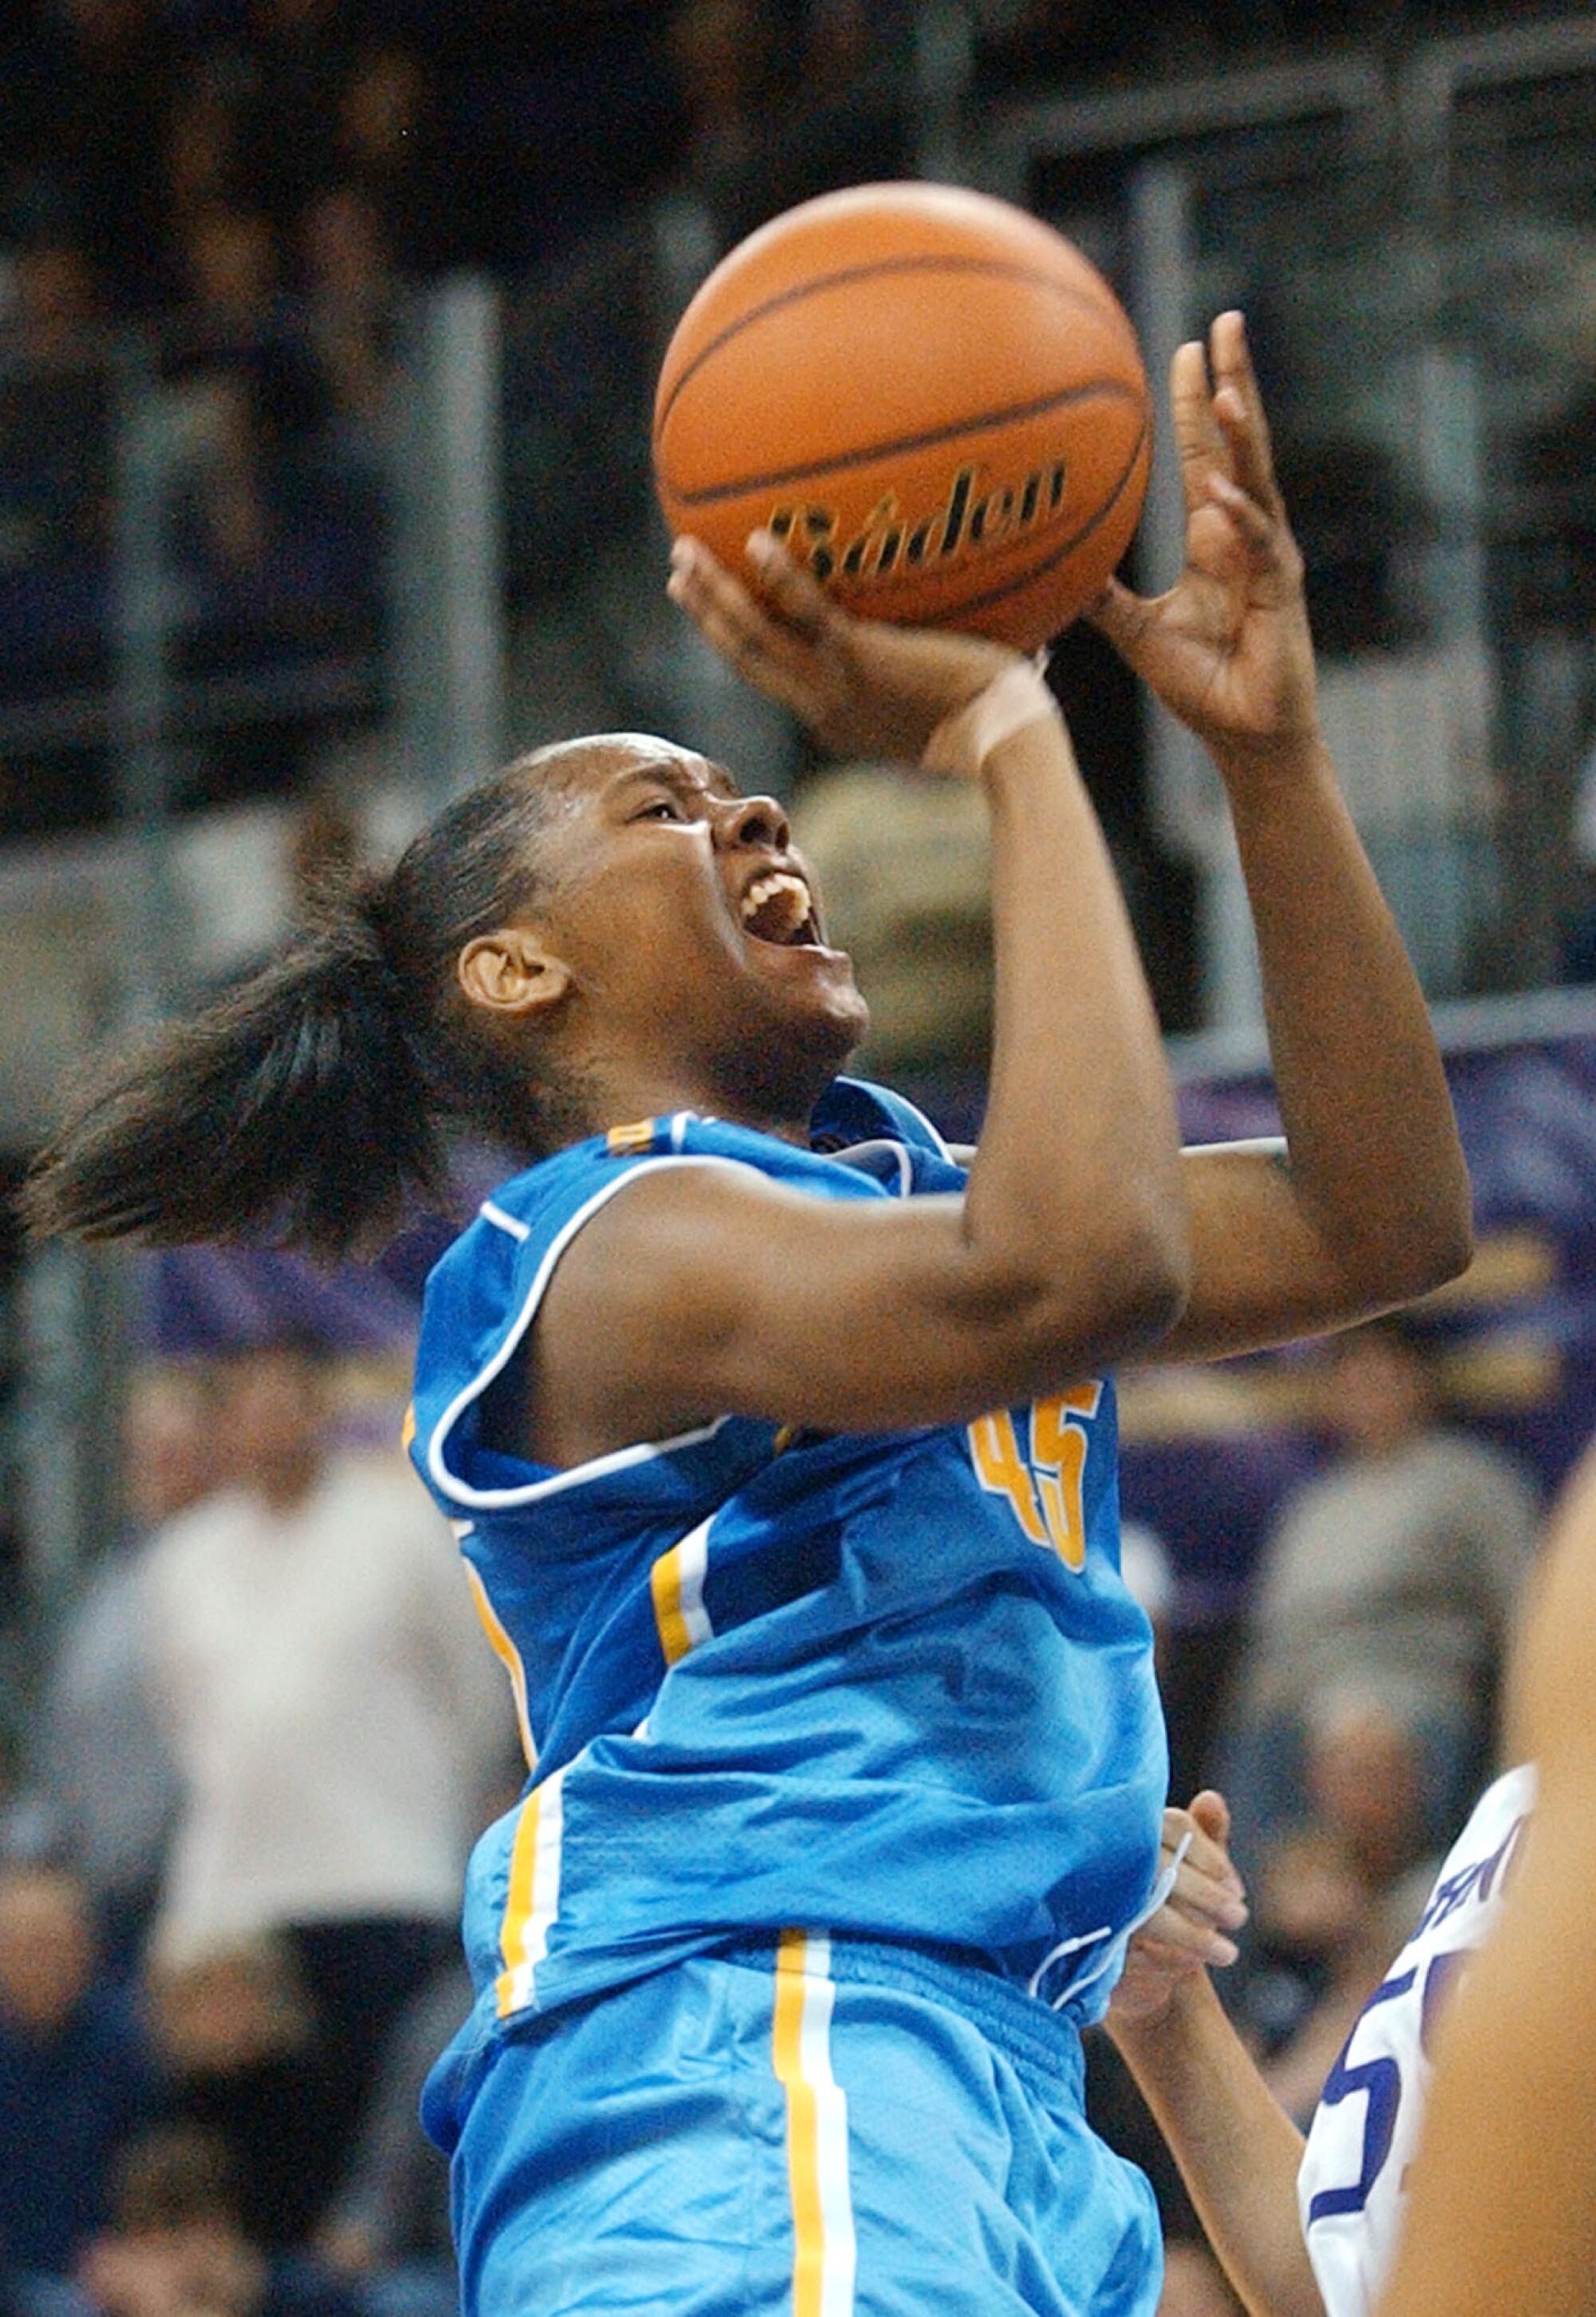 Noell Quinn drives for a layup while playing for UCLA in 2004.